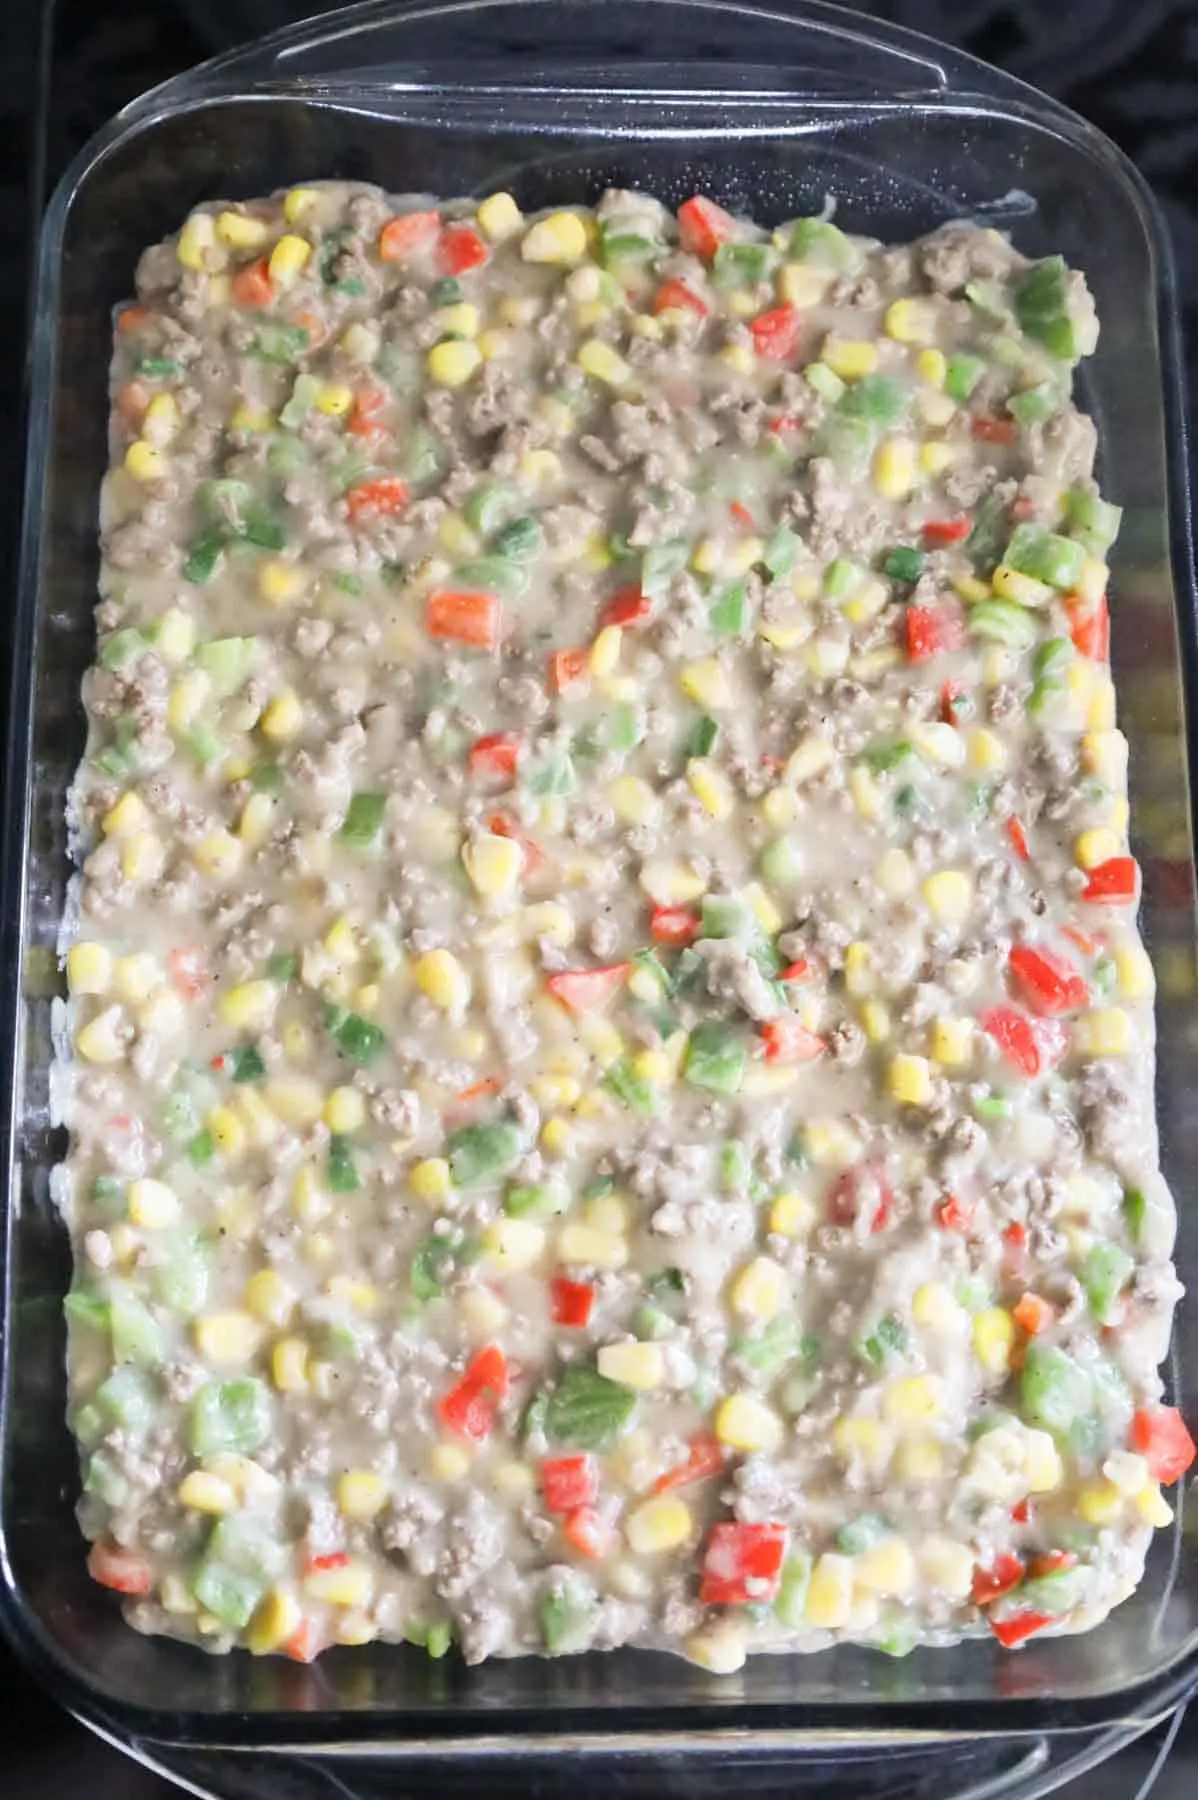 ground beef, instant mashed potato, corn and bell pepper mixture in a baking dish